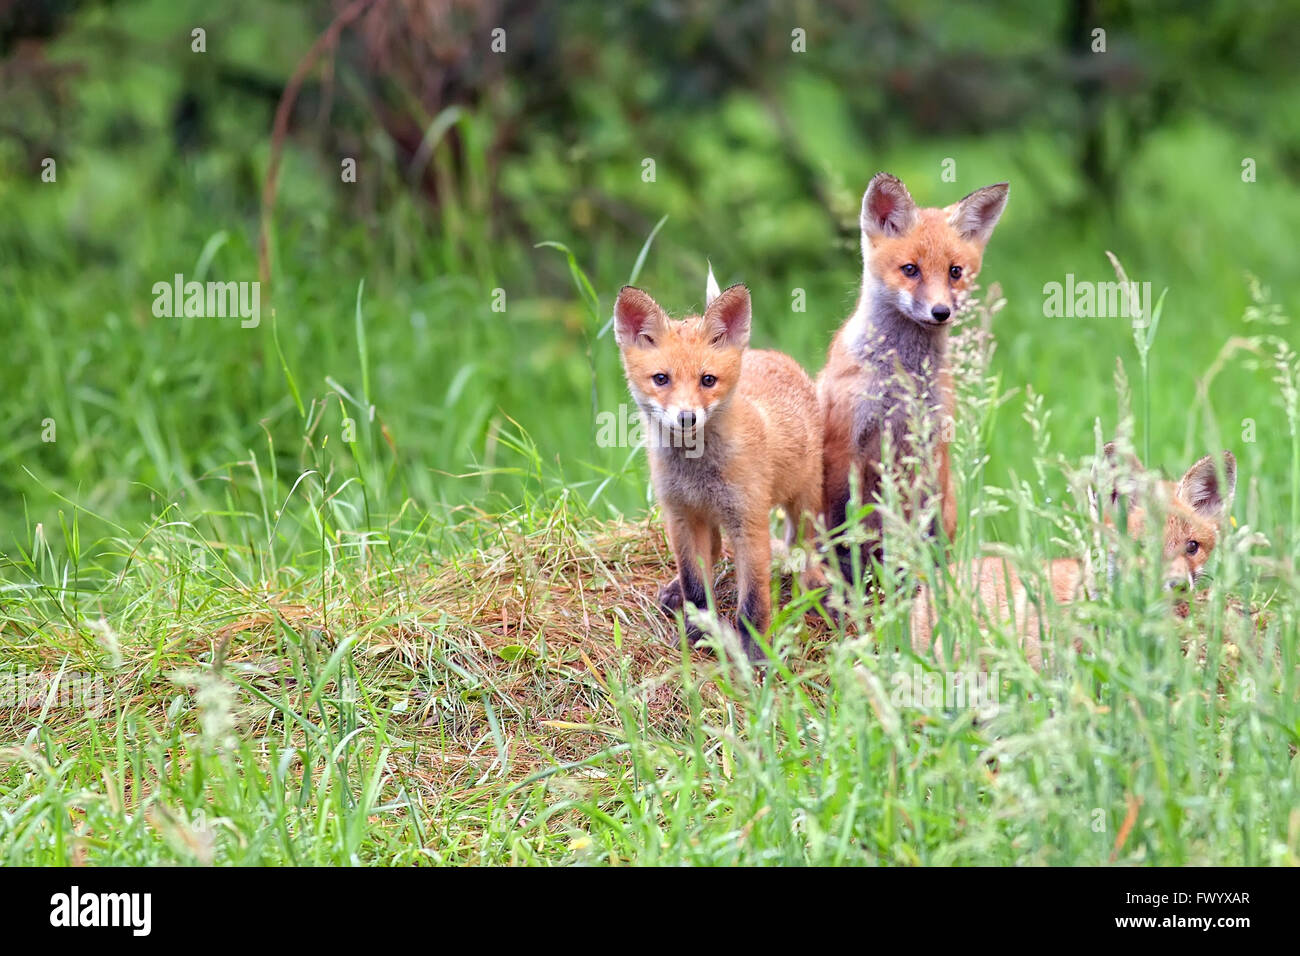 Foxes in the forest in the wild Stock Photo